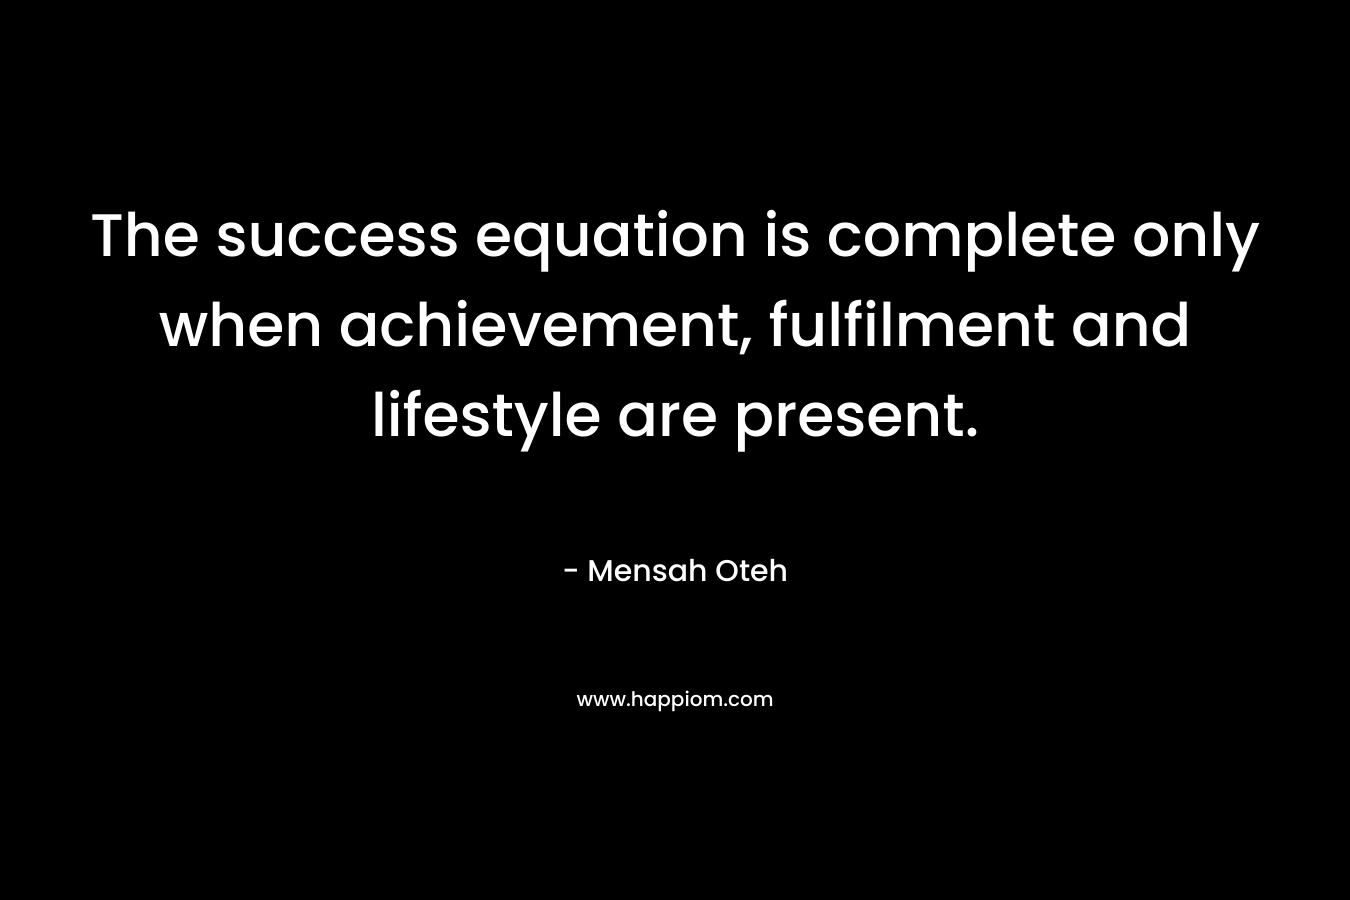 The success equation is complete only when achievement, fulfilment and lifestyle are present.